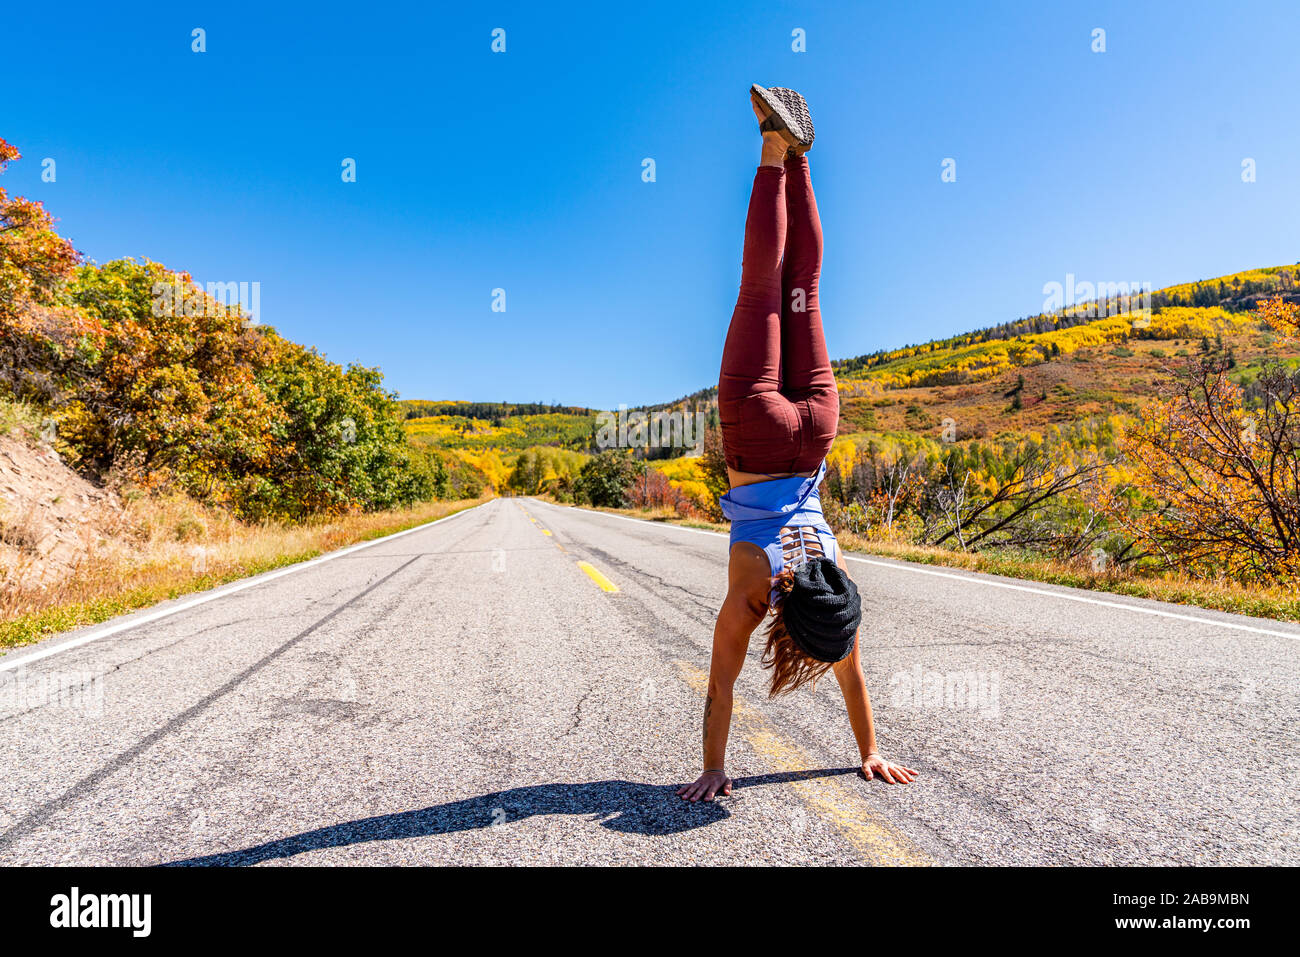 Beautiful woman doing handstands in Colorado's outdoors Stock Photo